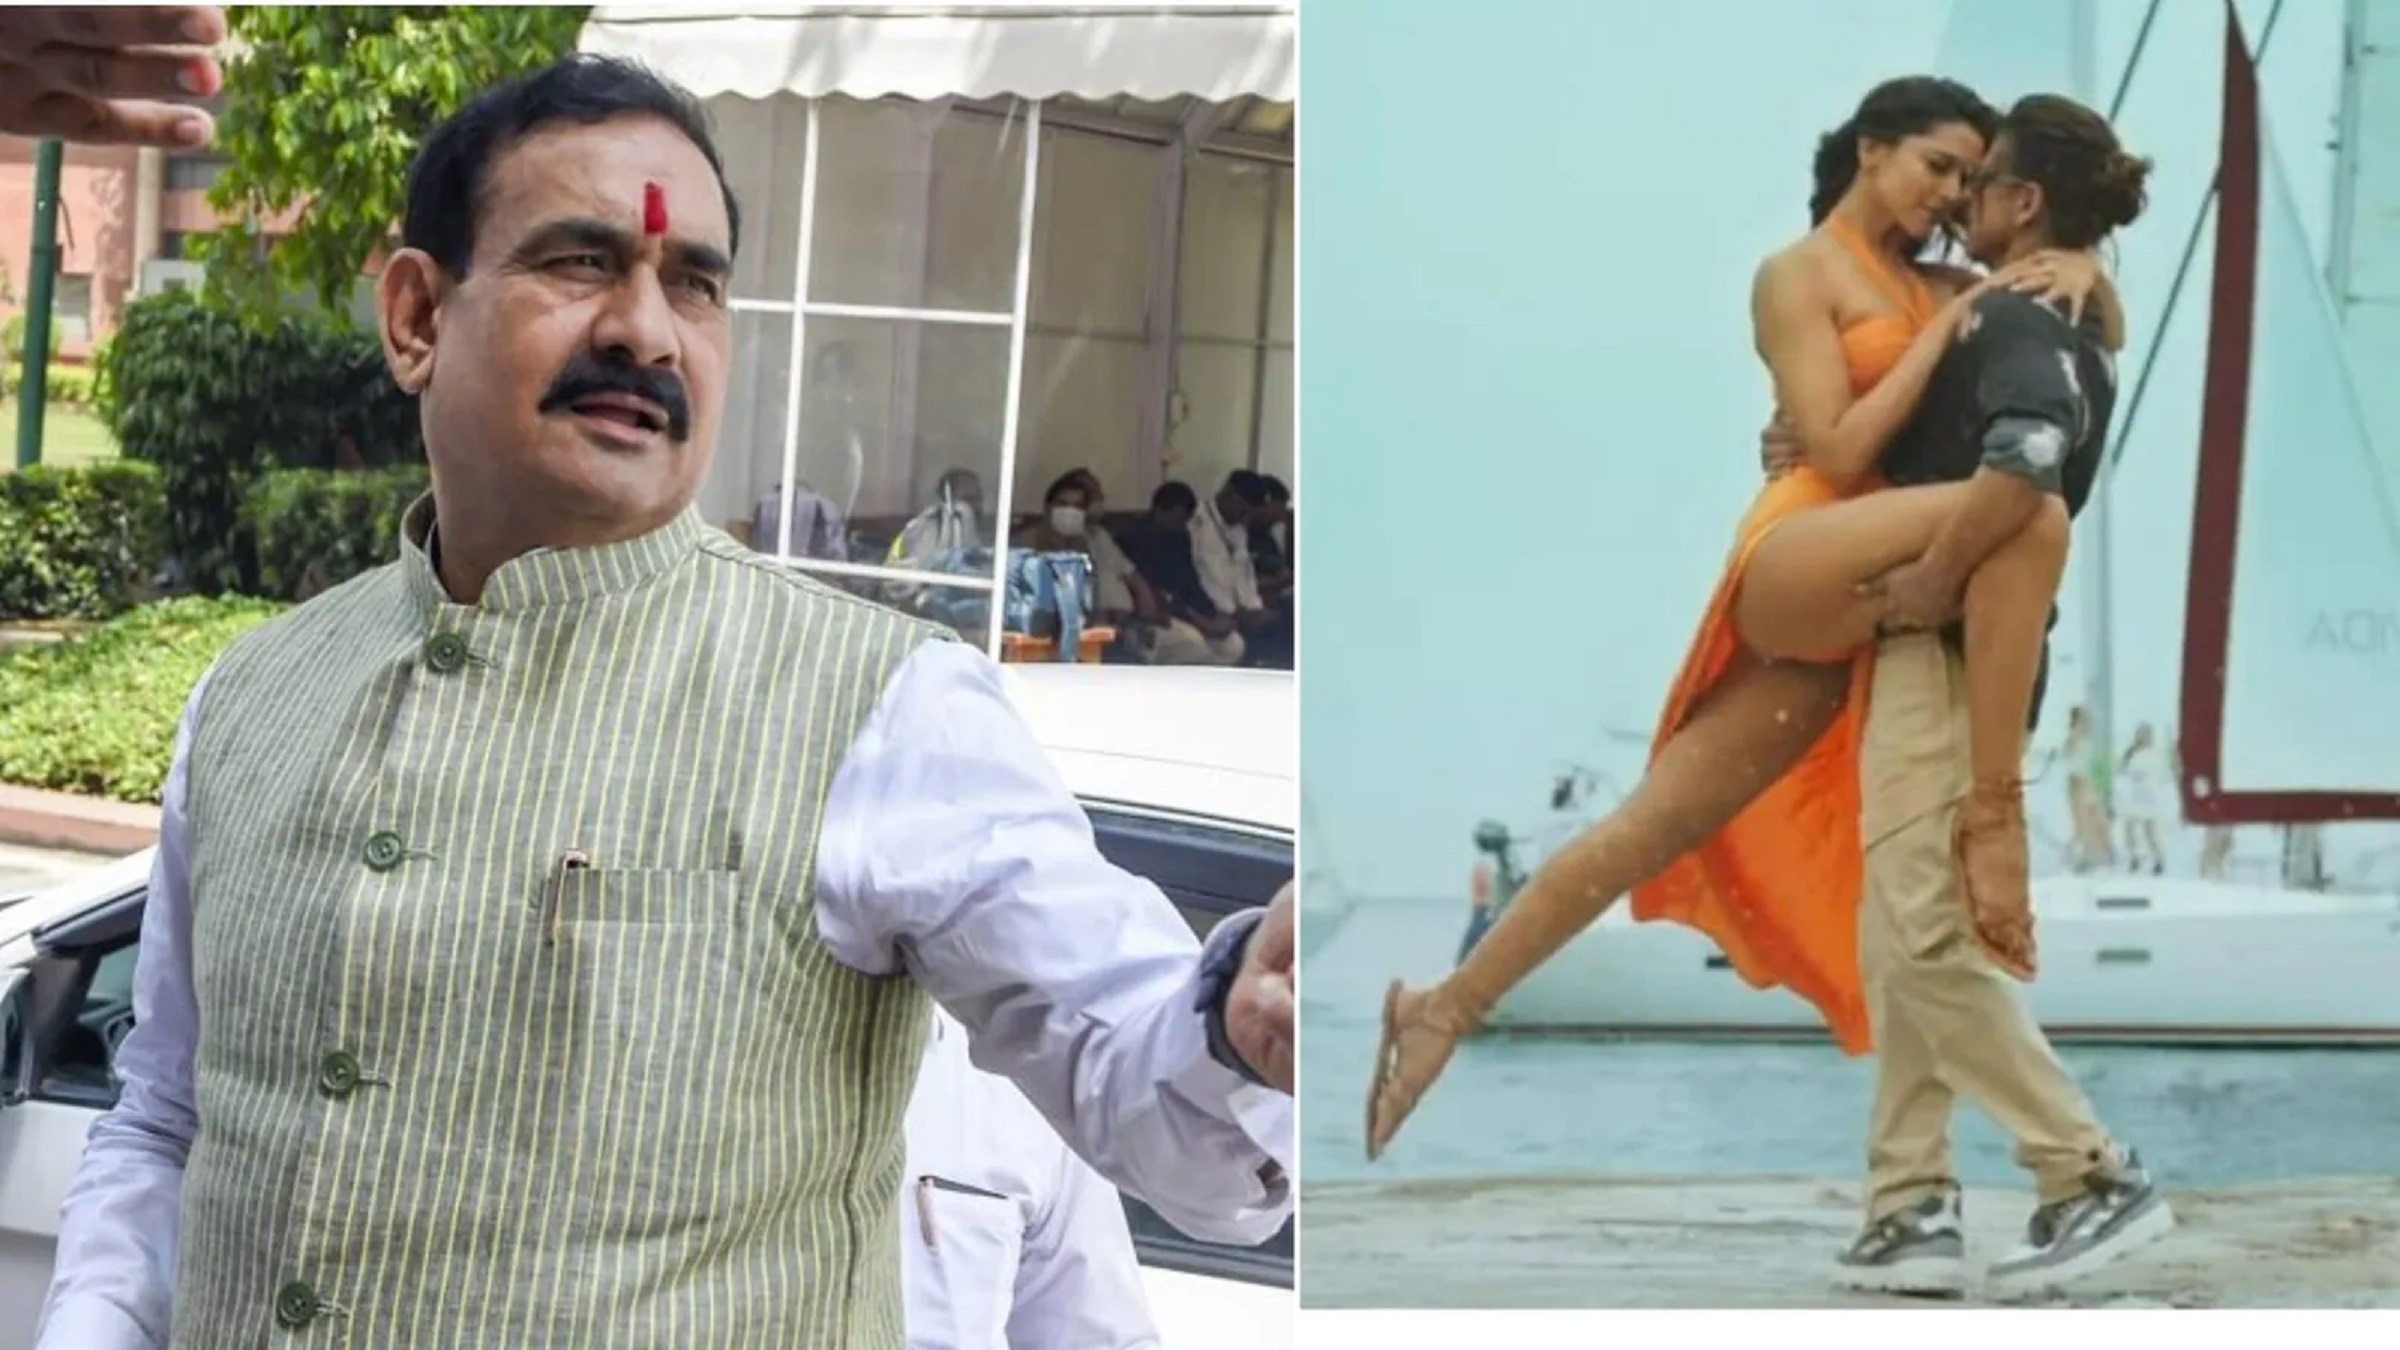 MP Minister warns to ban Pathaan movie in the state over Deepika’s outfit in ‘Besharam Rang’ song